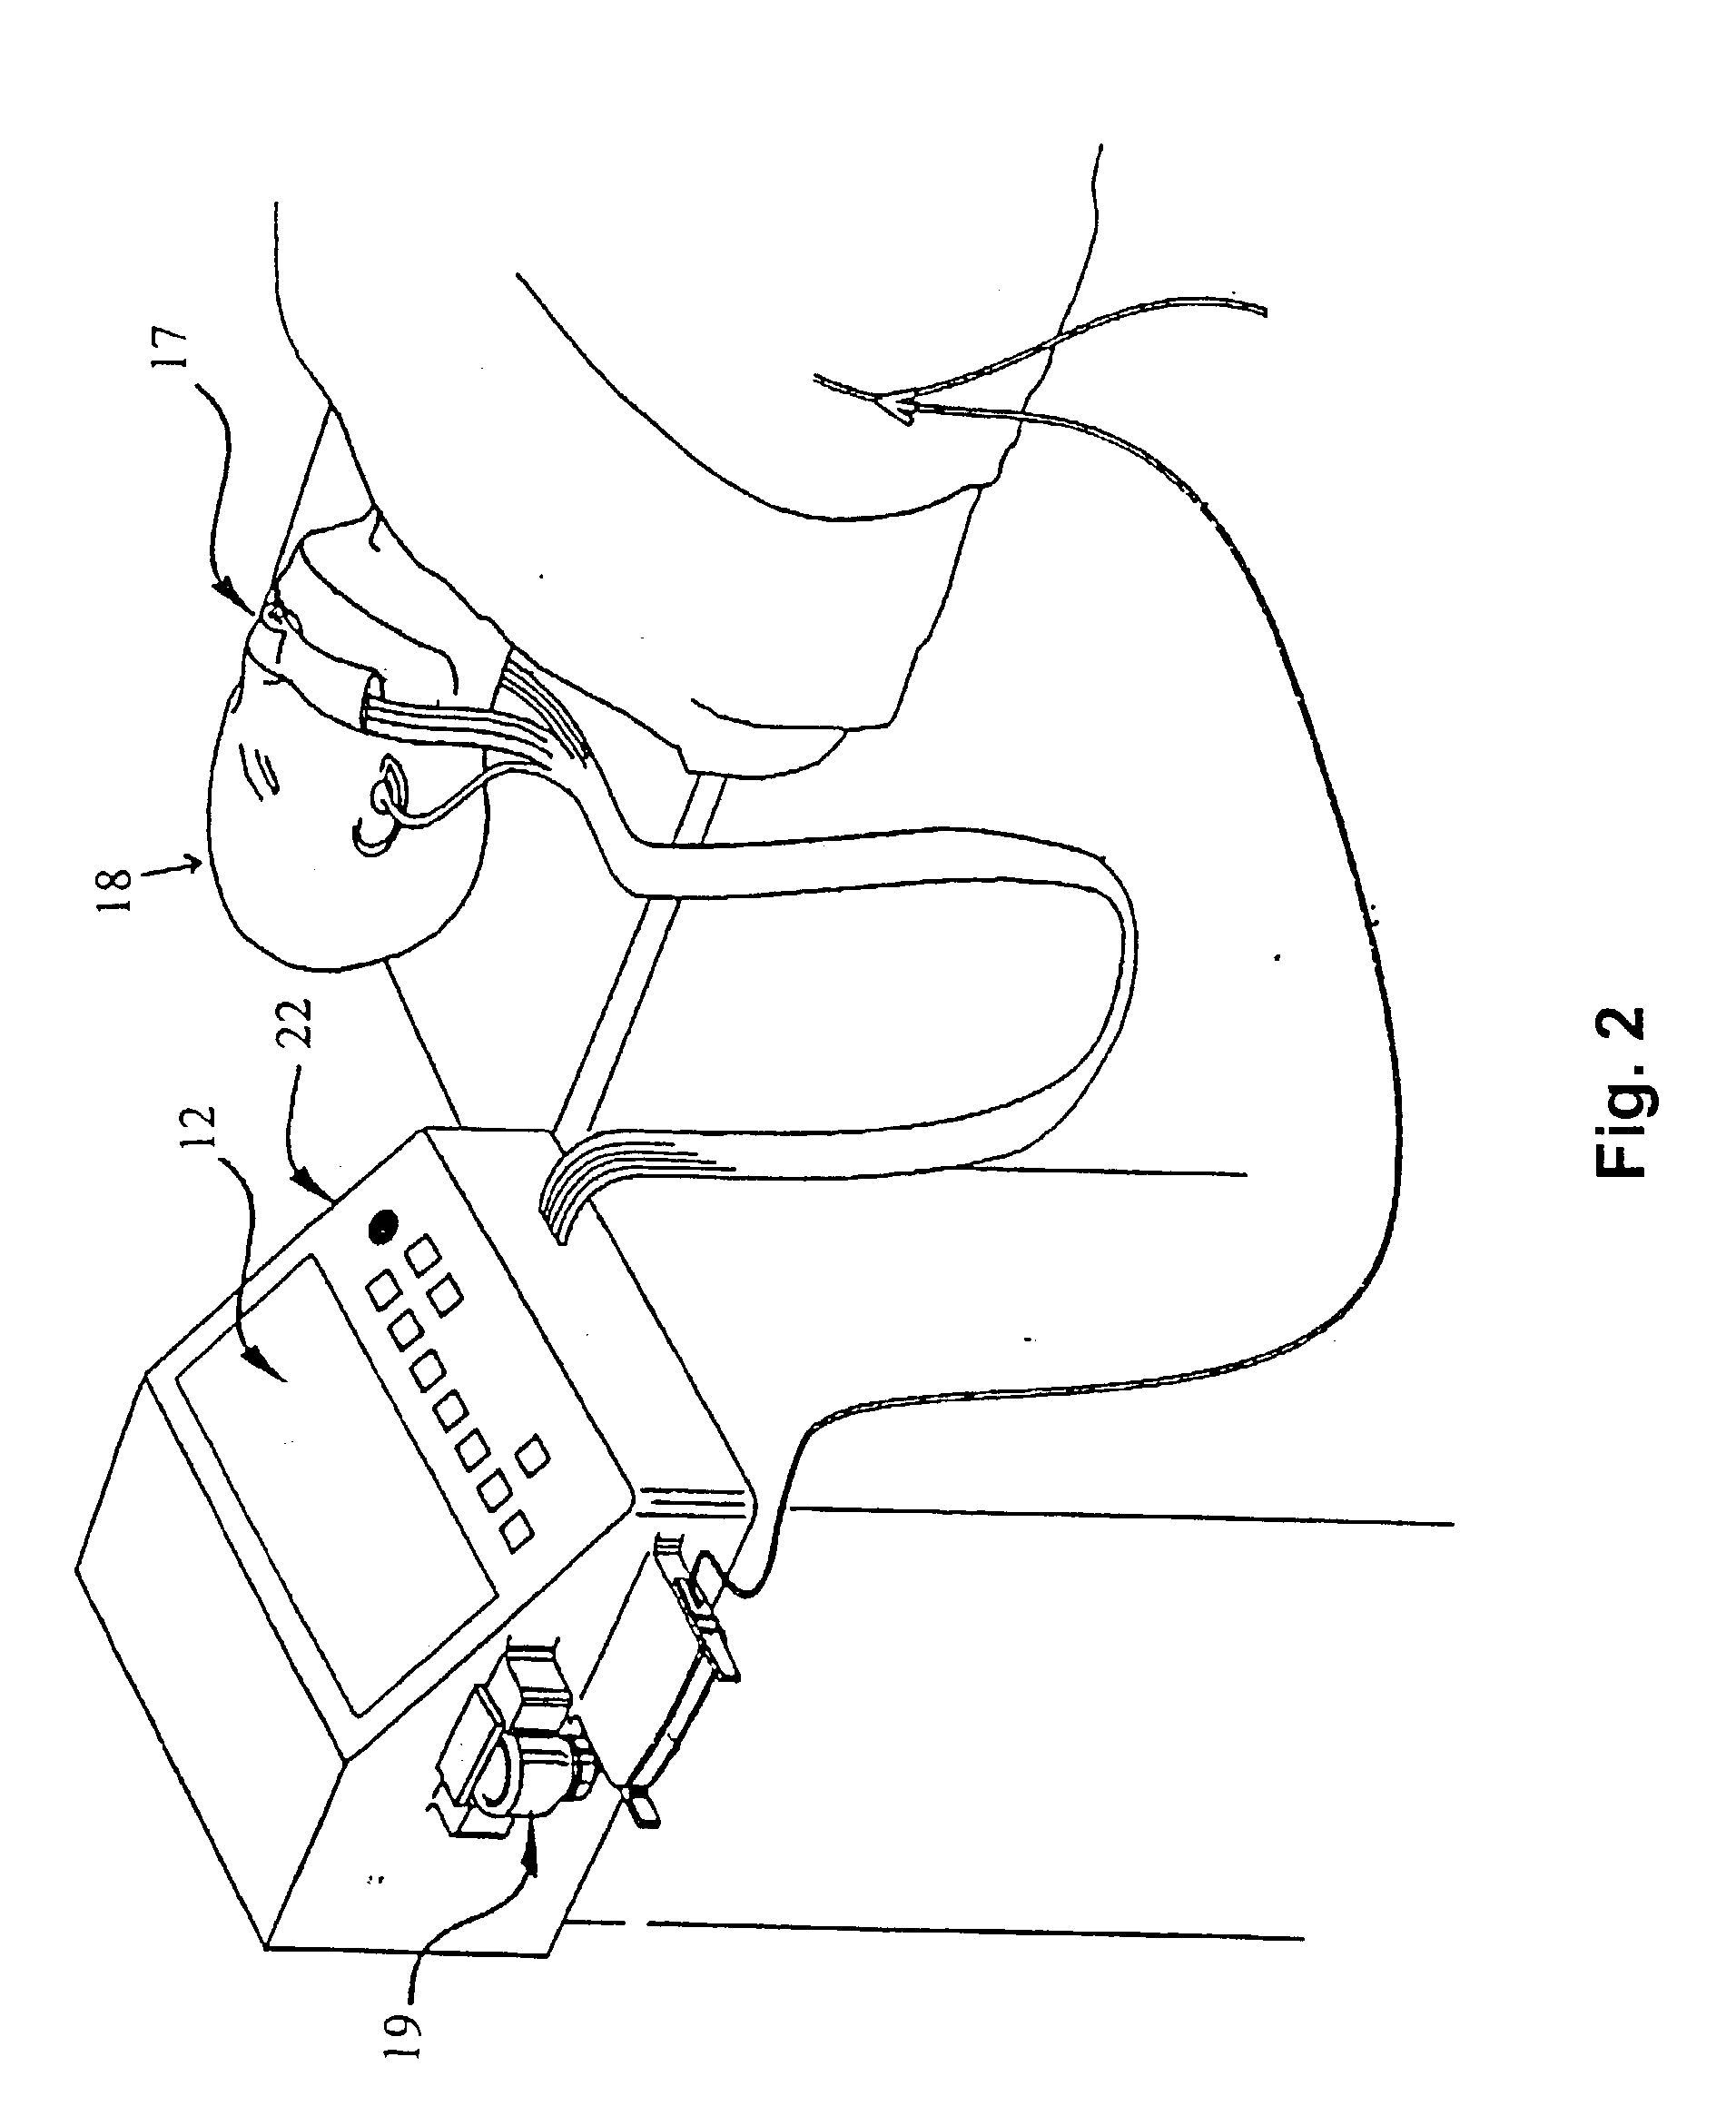 System and method for permitting sterile operation of a sedation and analgesia system